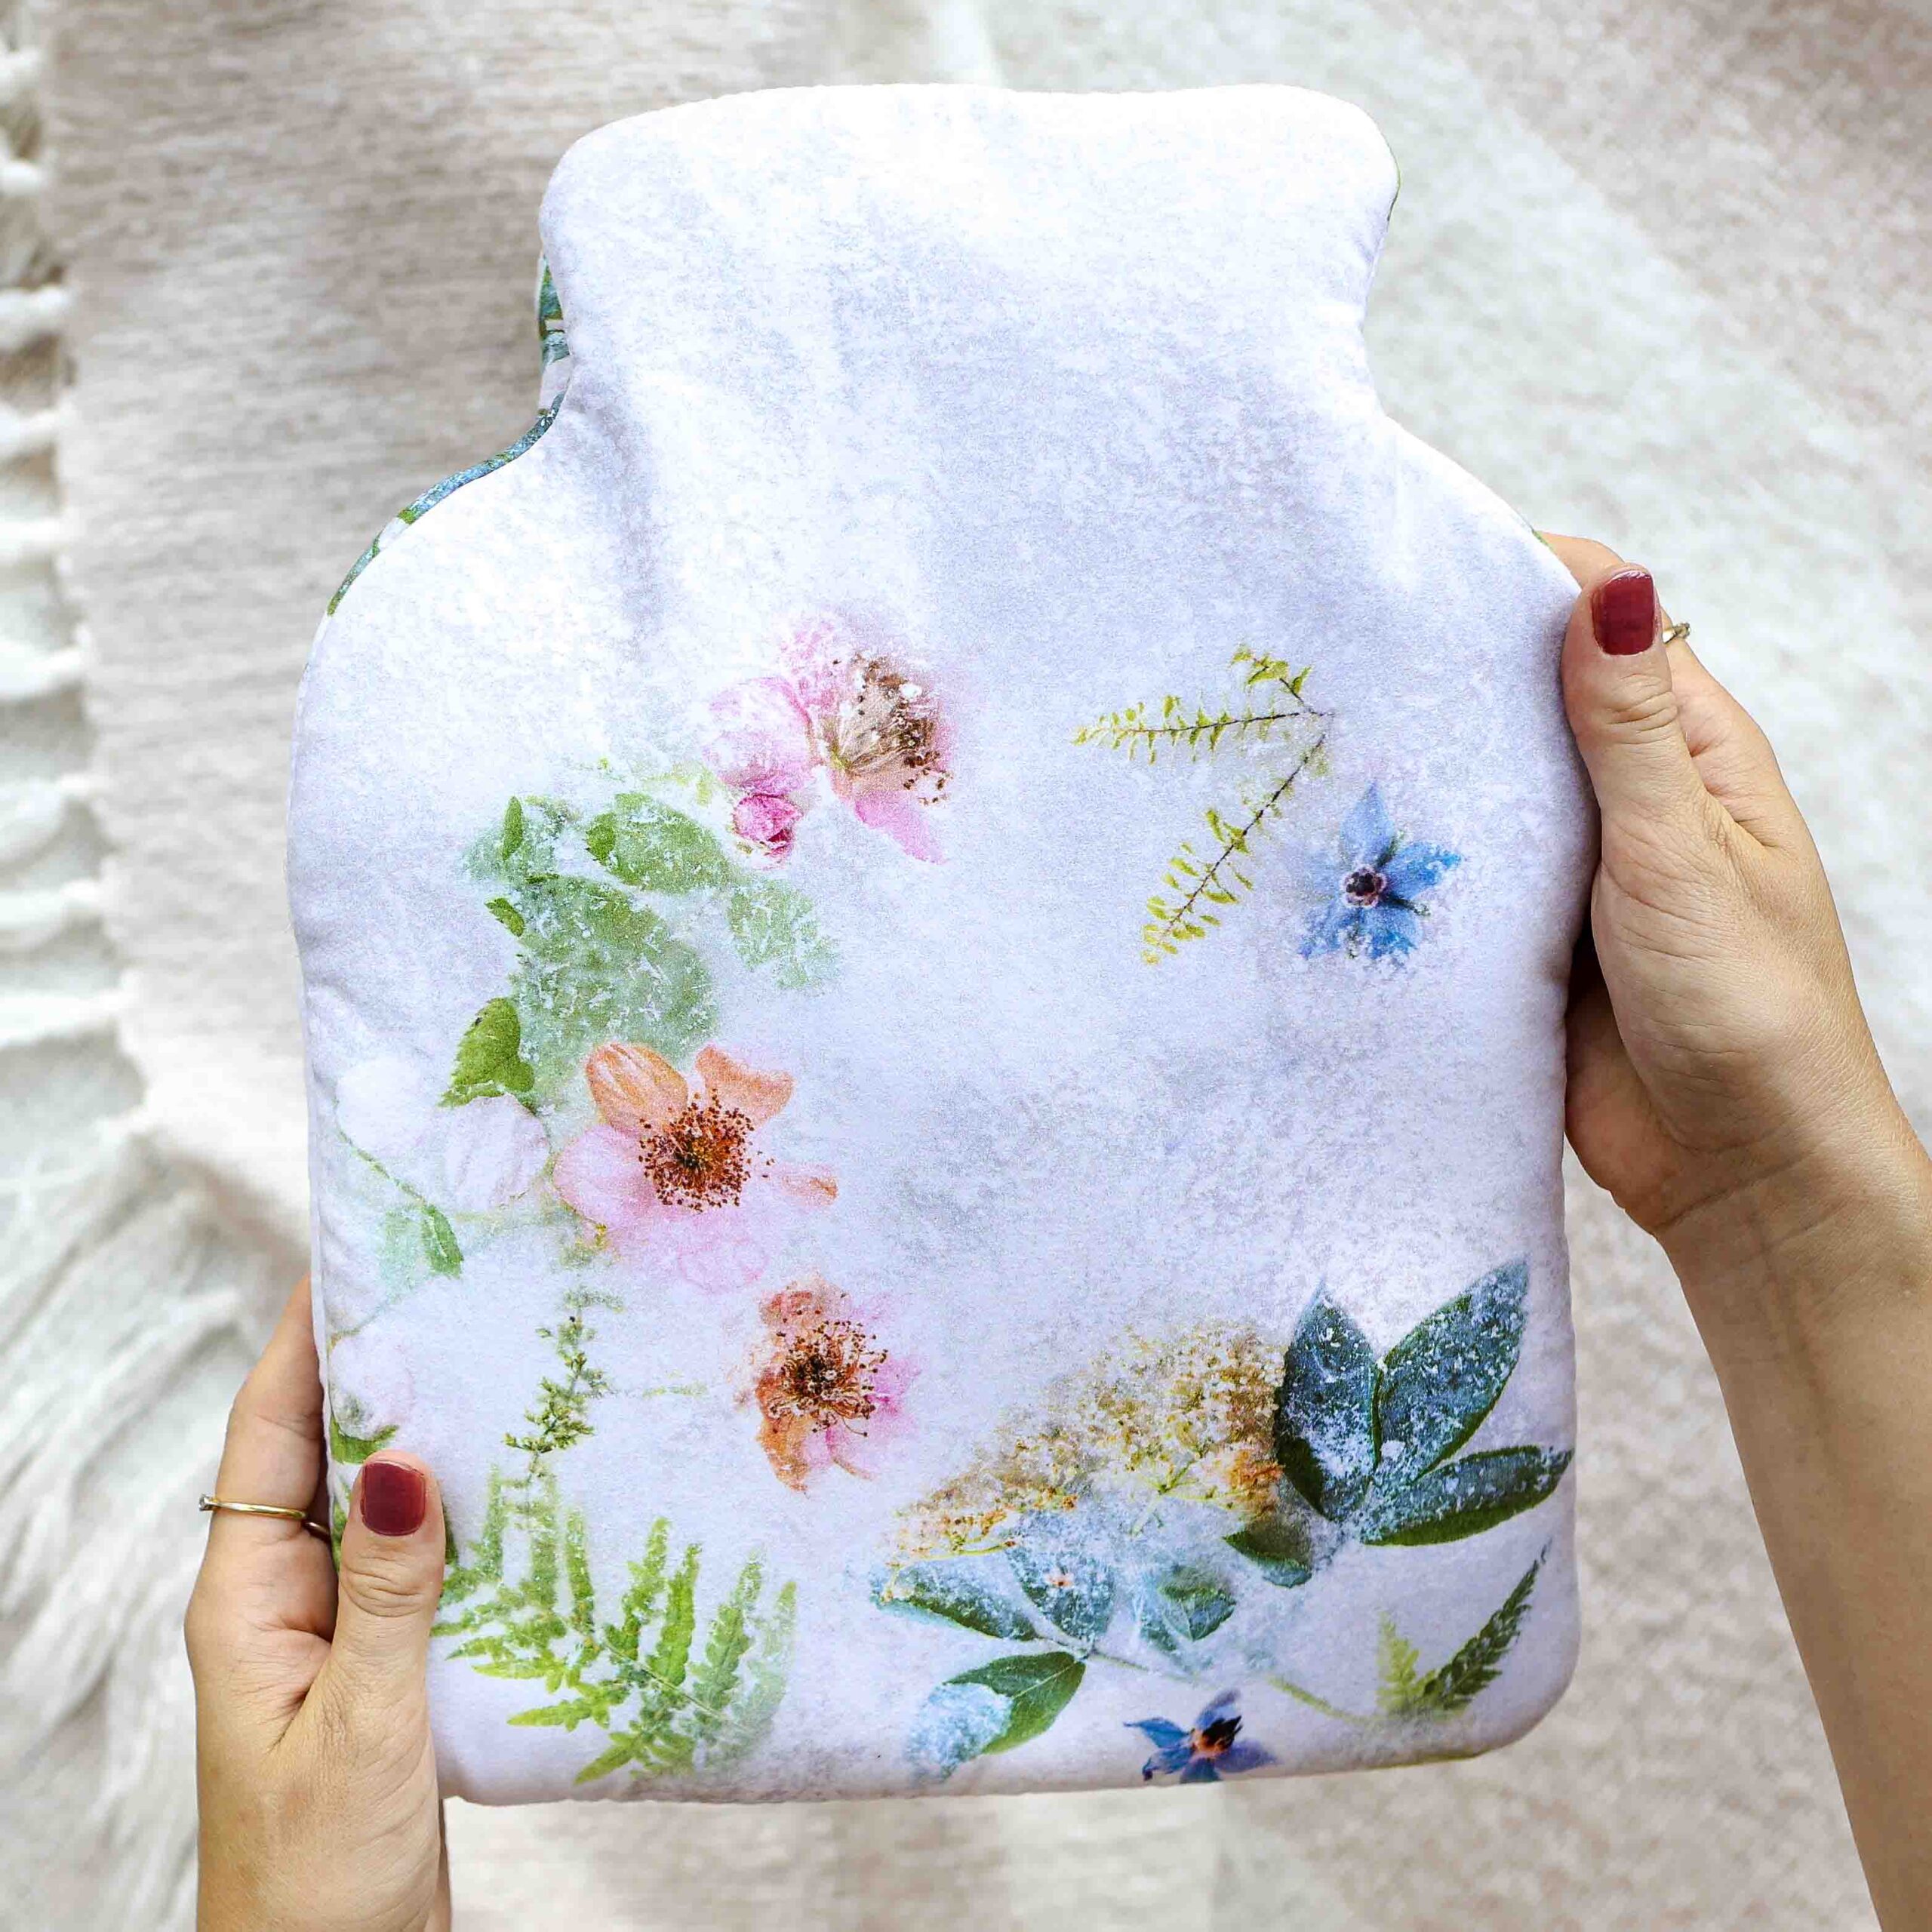 Floral hot water bottle gift StephieAnn